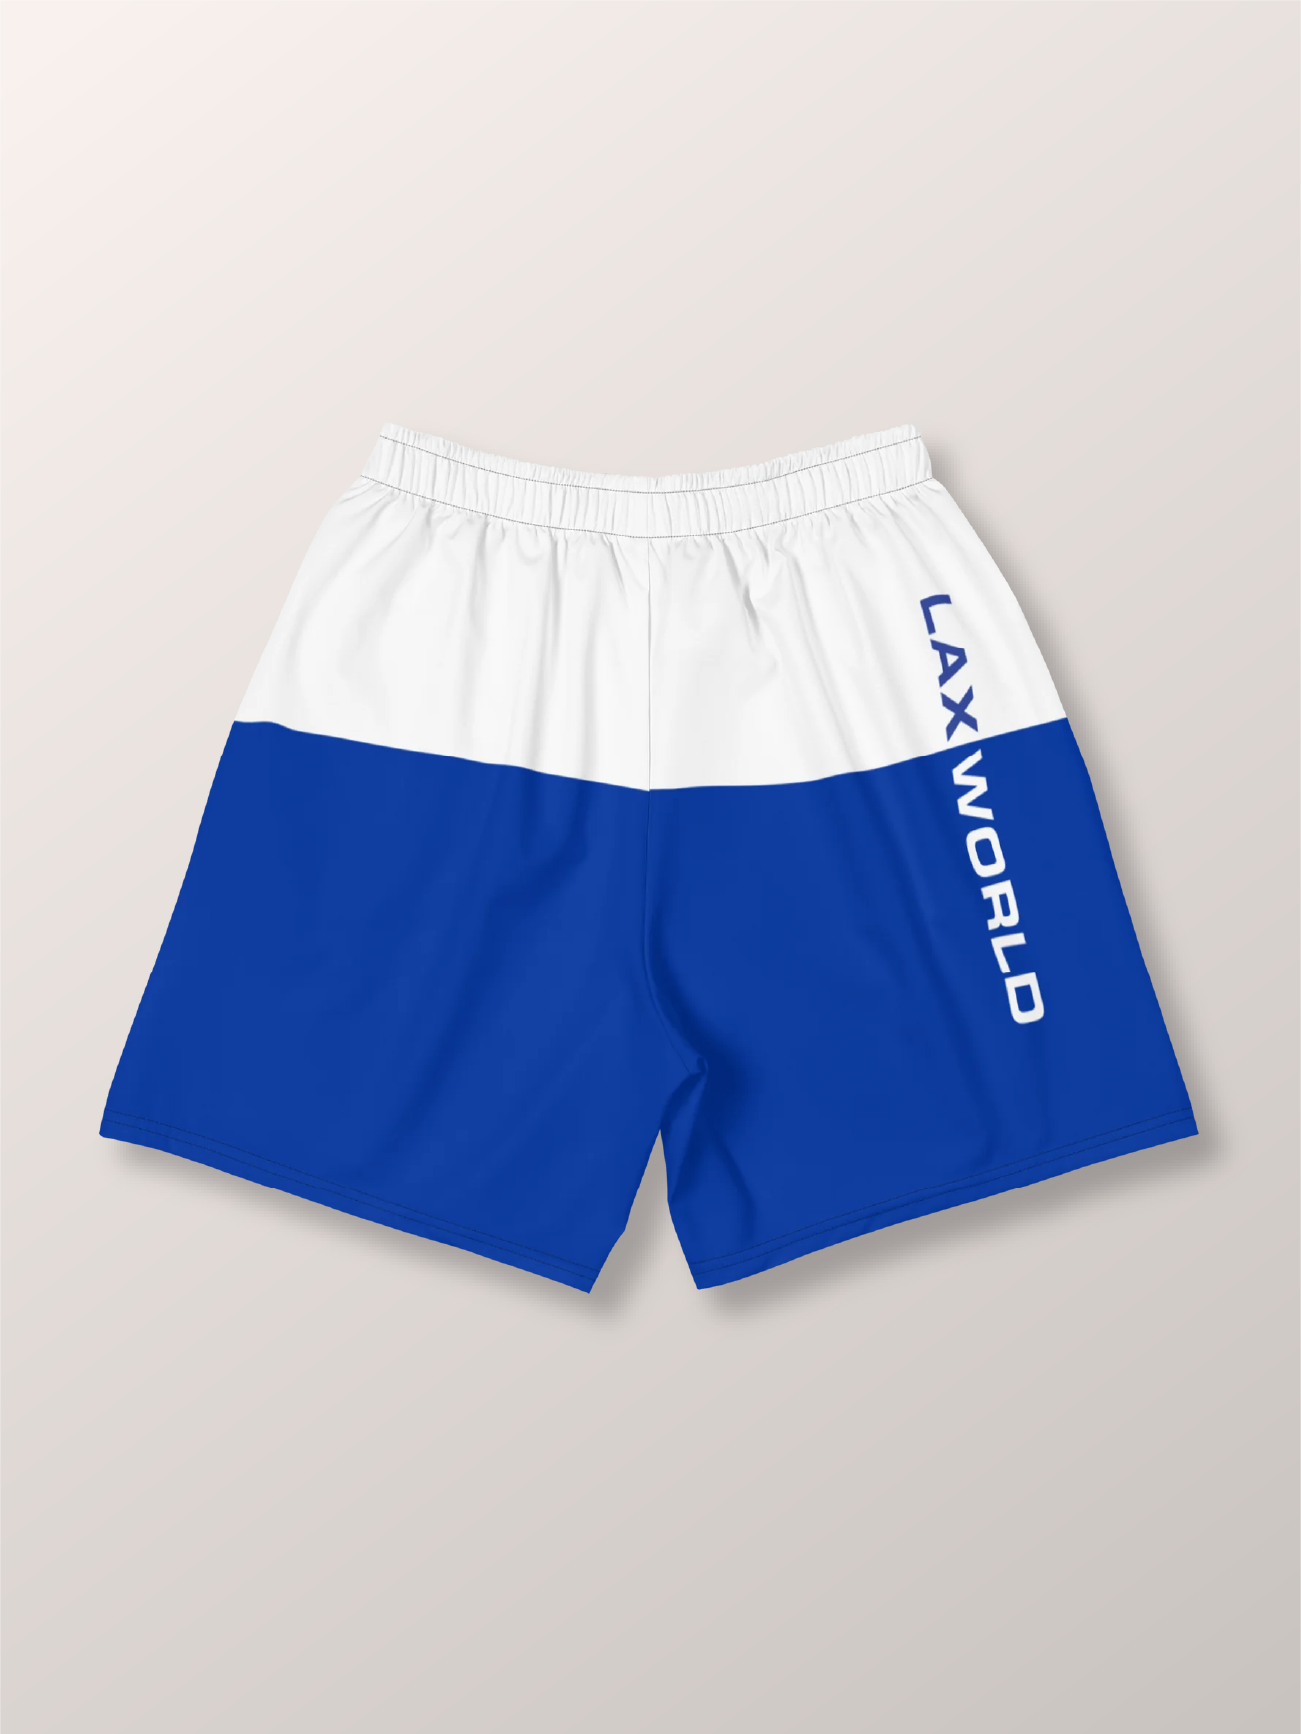 Premium Creator’s White/Blue Athletic Lacrosse Short | Blue and White | Man - Off Field